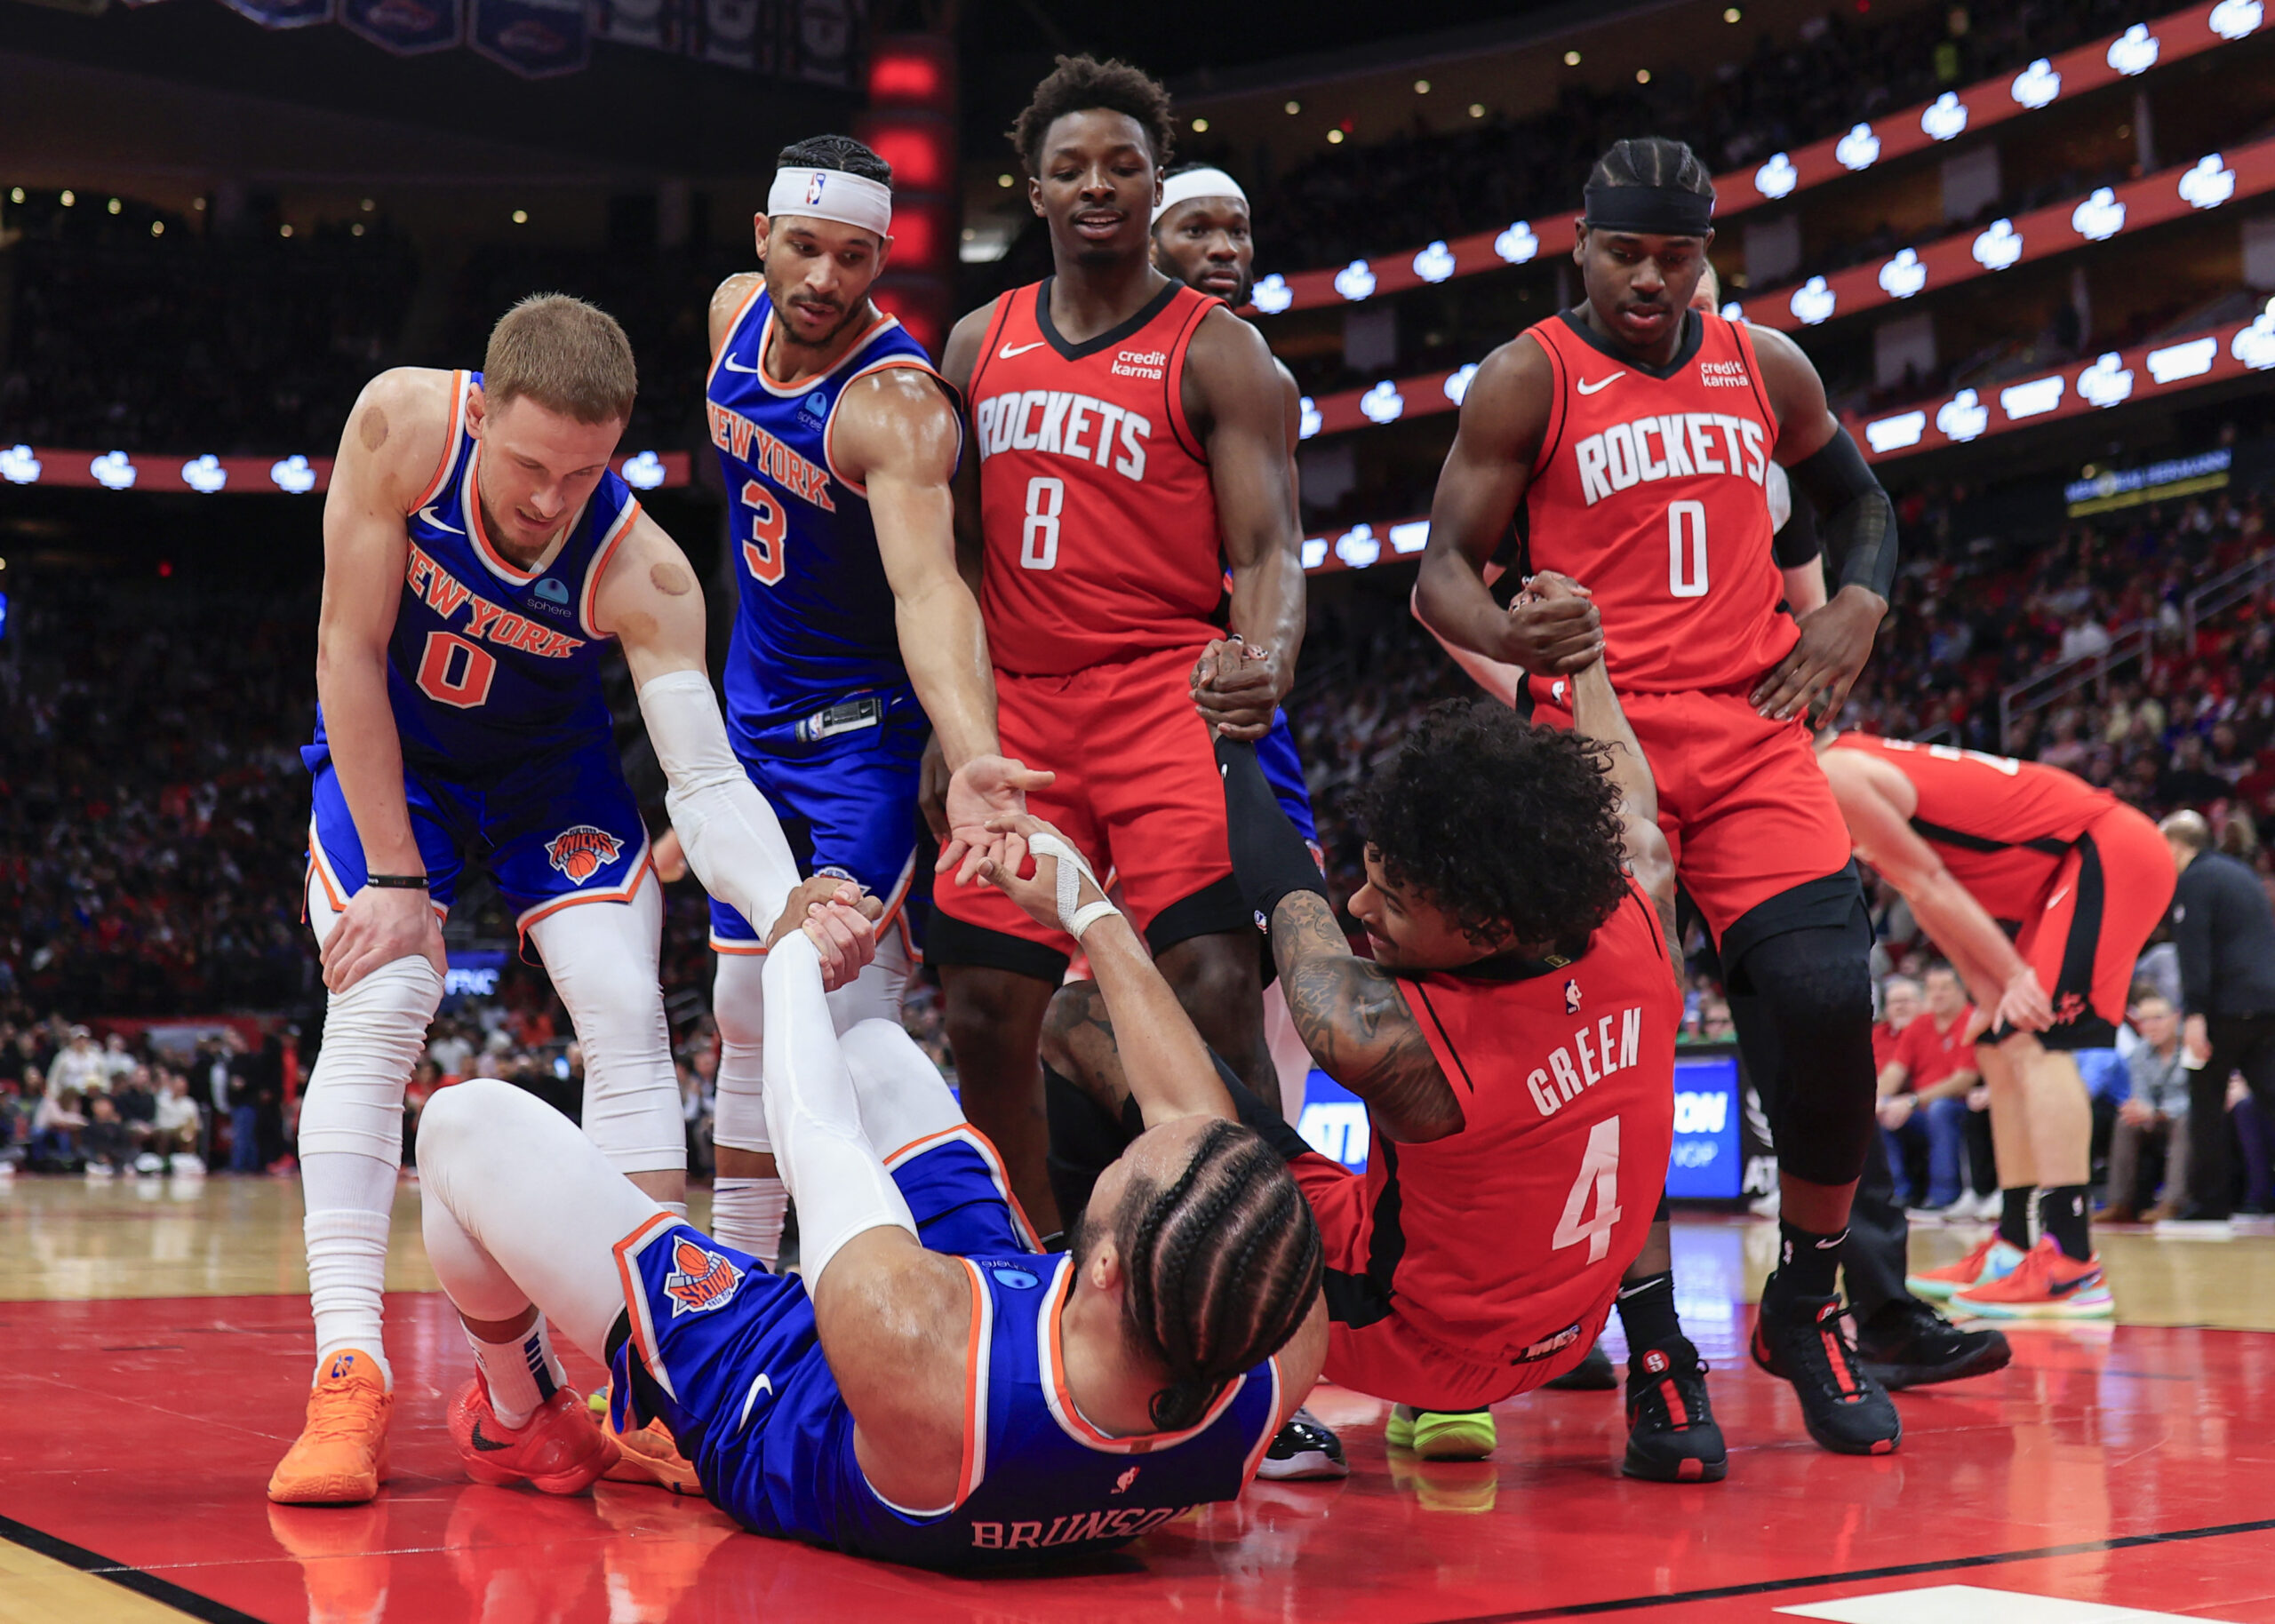 ESPN Sources: The Knicks are filing a protest with the NBA to dispute the  105-103 loss to the Rockets on Monday. Both the NBA's L2M report and crew  chief Ed Malloy acknowledged